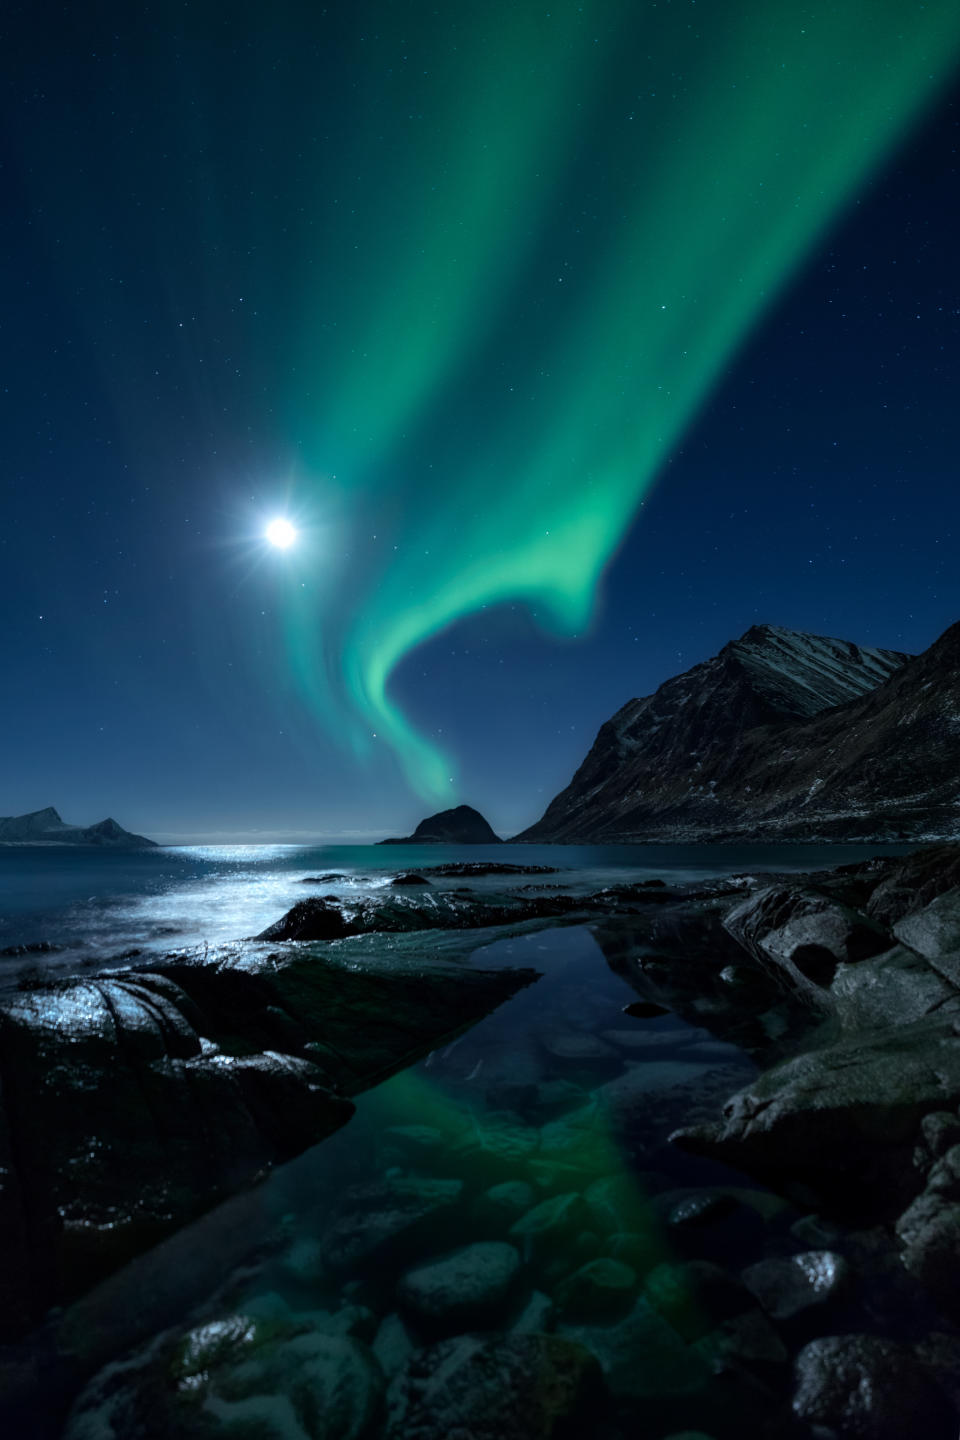 Astronomy Photographer of the Year: ‘Aurorae’, Commended